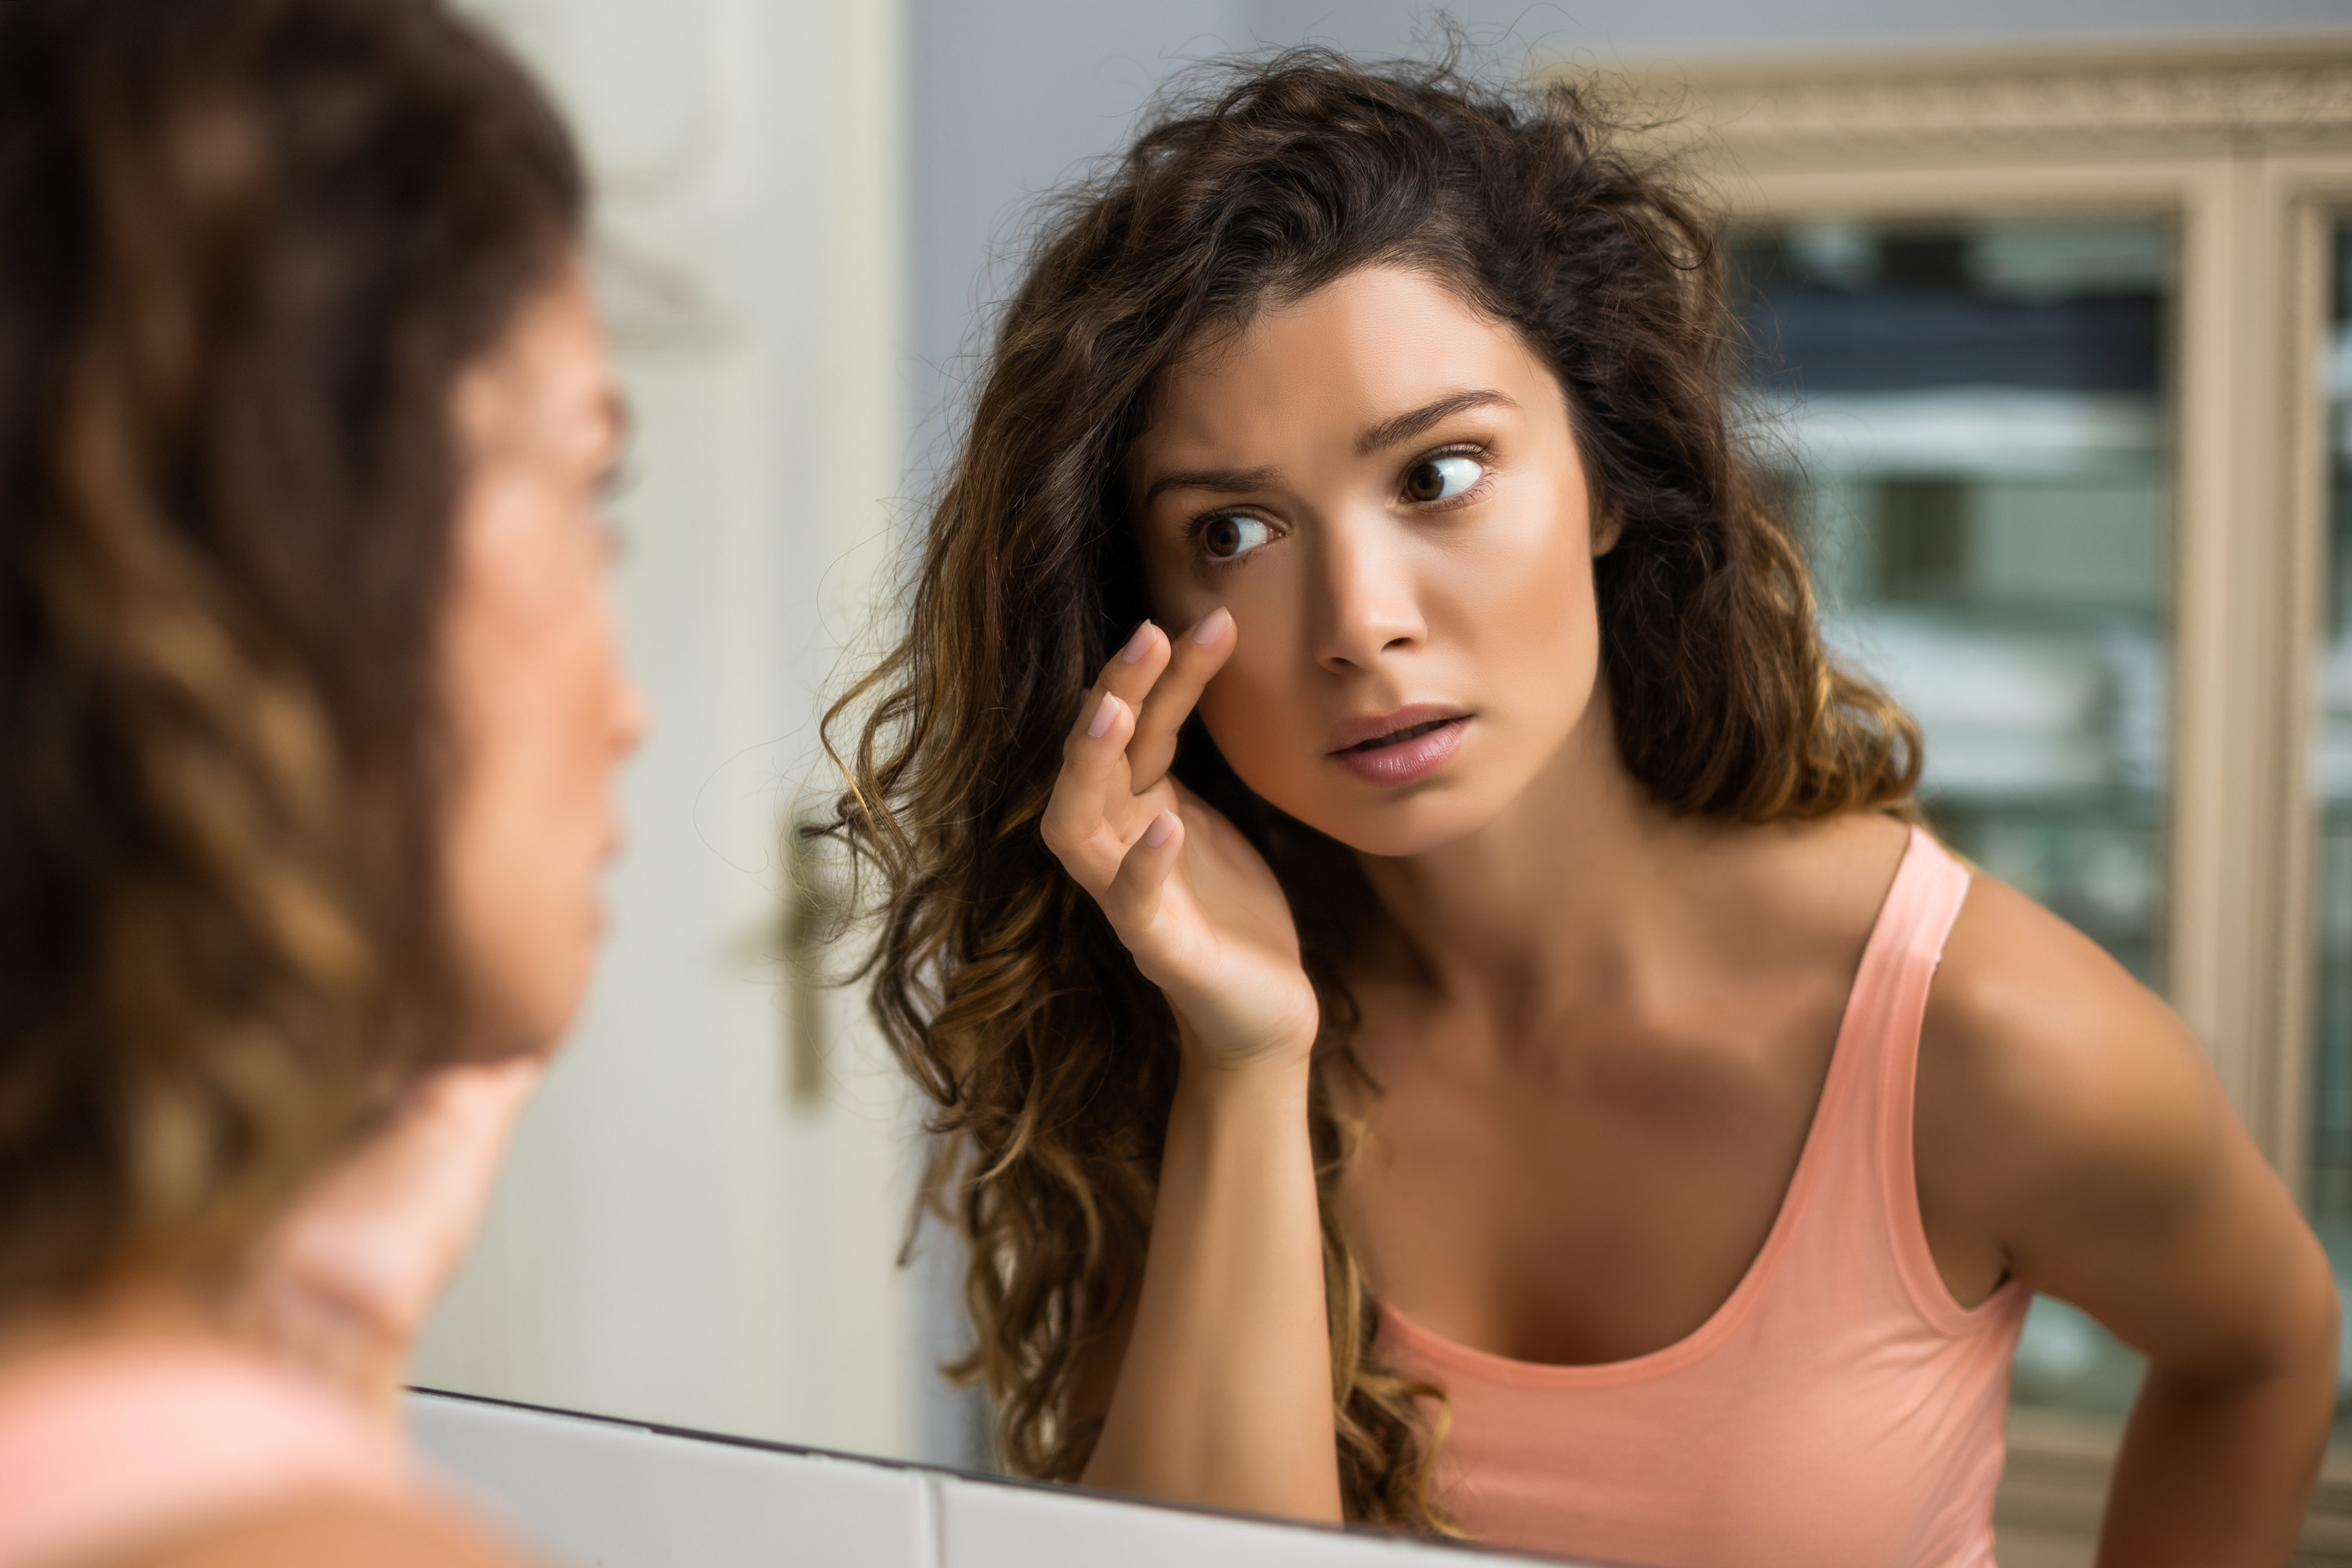 A woman looking in the mirror at her tired eyes